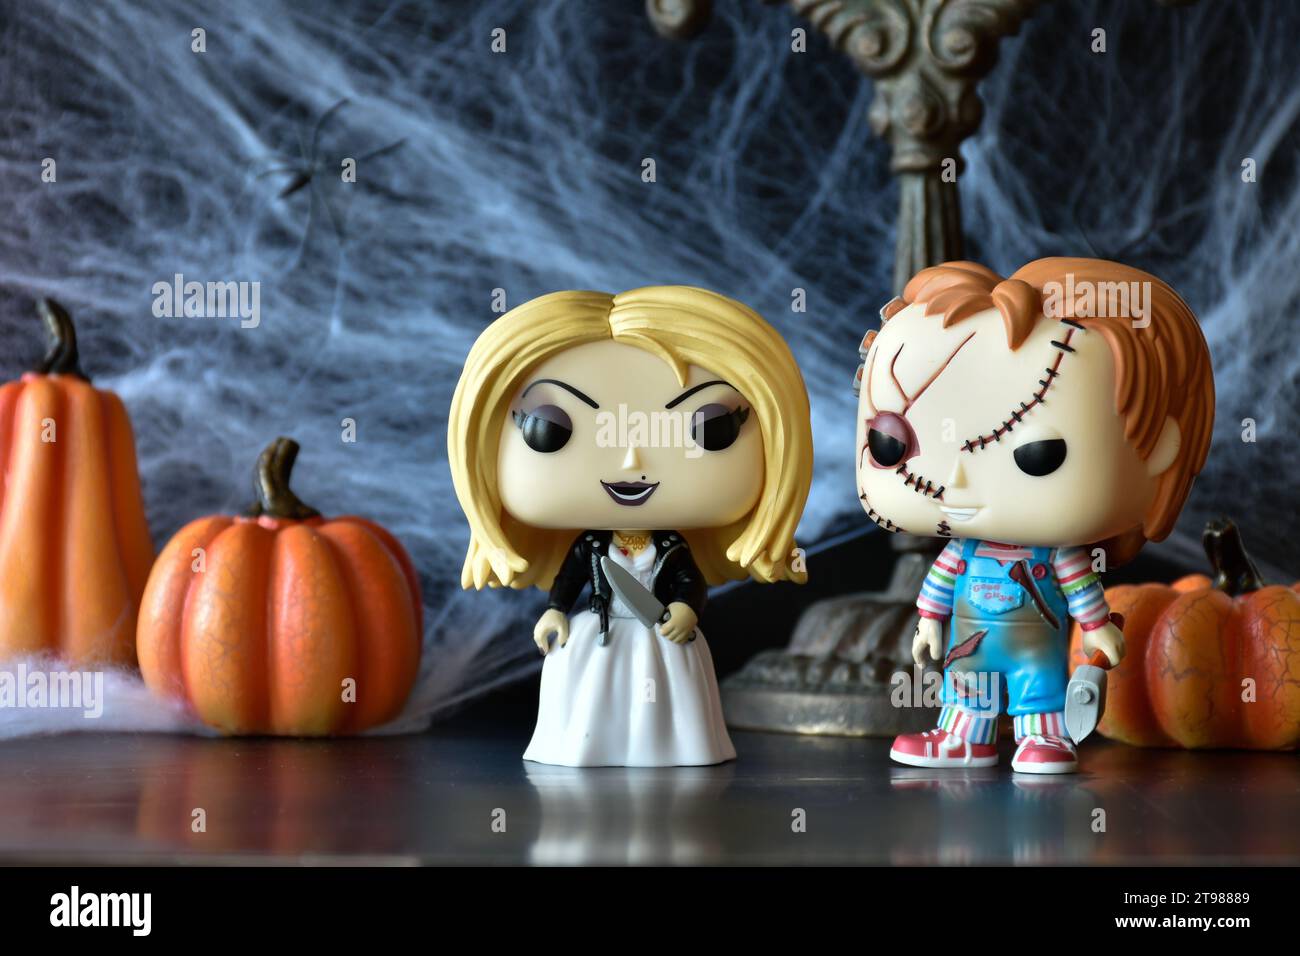 Funko Pop action figures of Chucky and Tiffany bride of Chucky